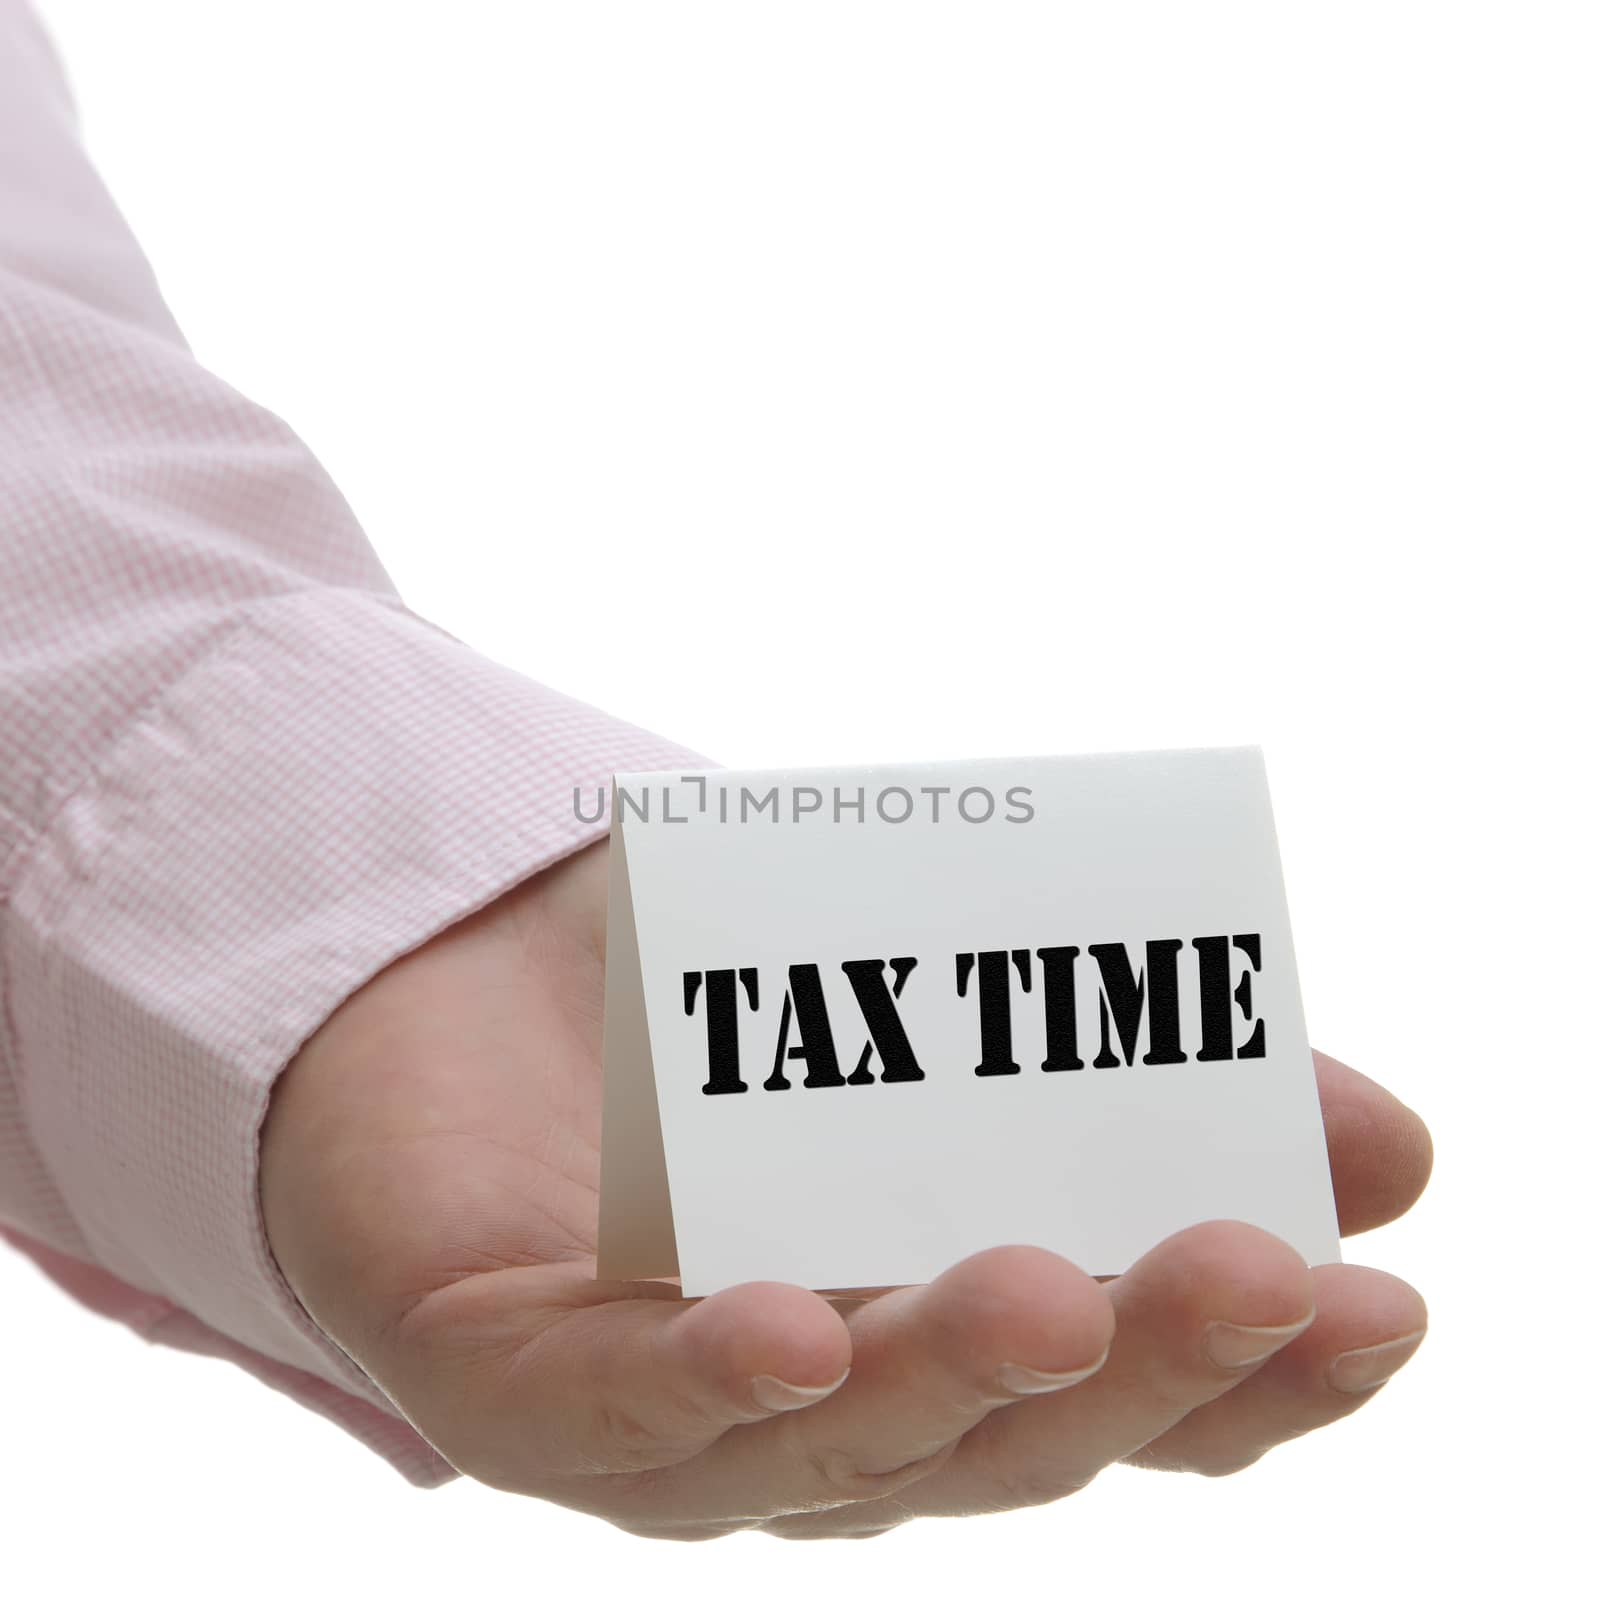 Tax Time - Sign Series  by payphoto